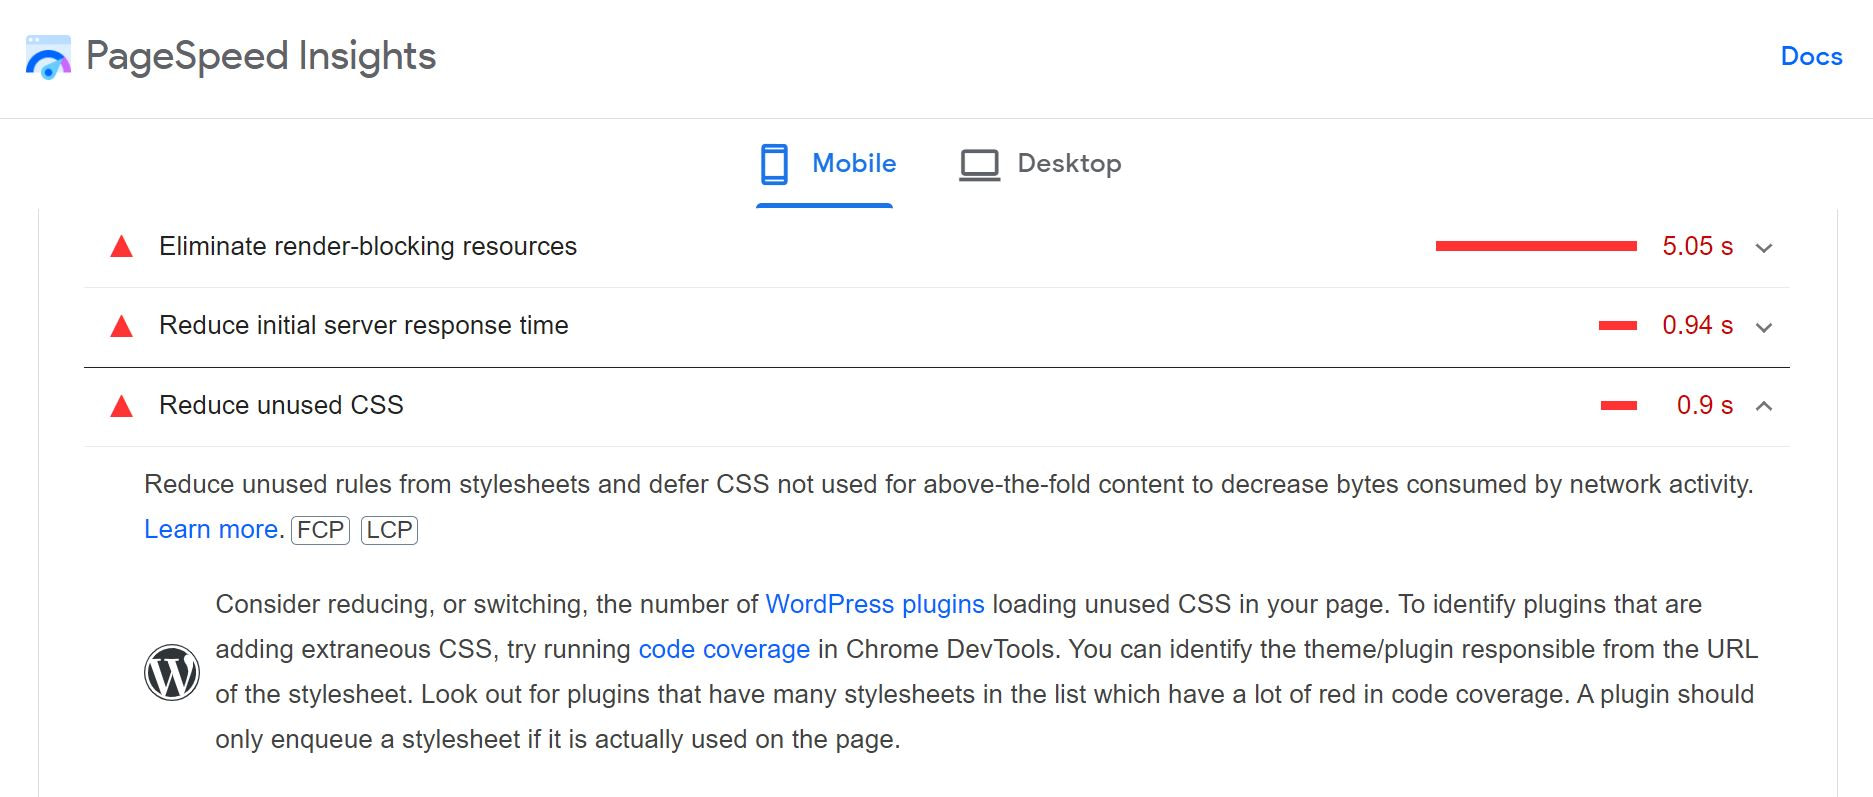 PageSpeed Insights recommendation for reducing unused CSS